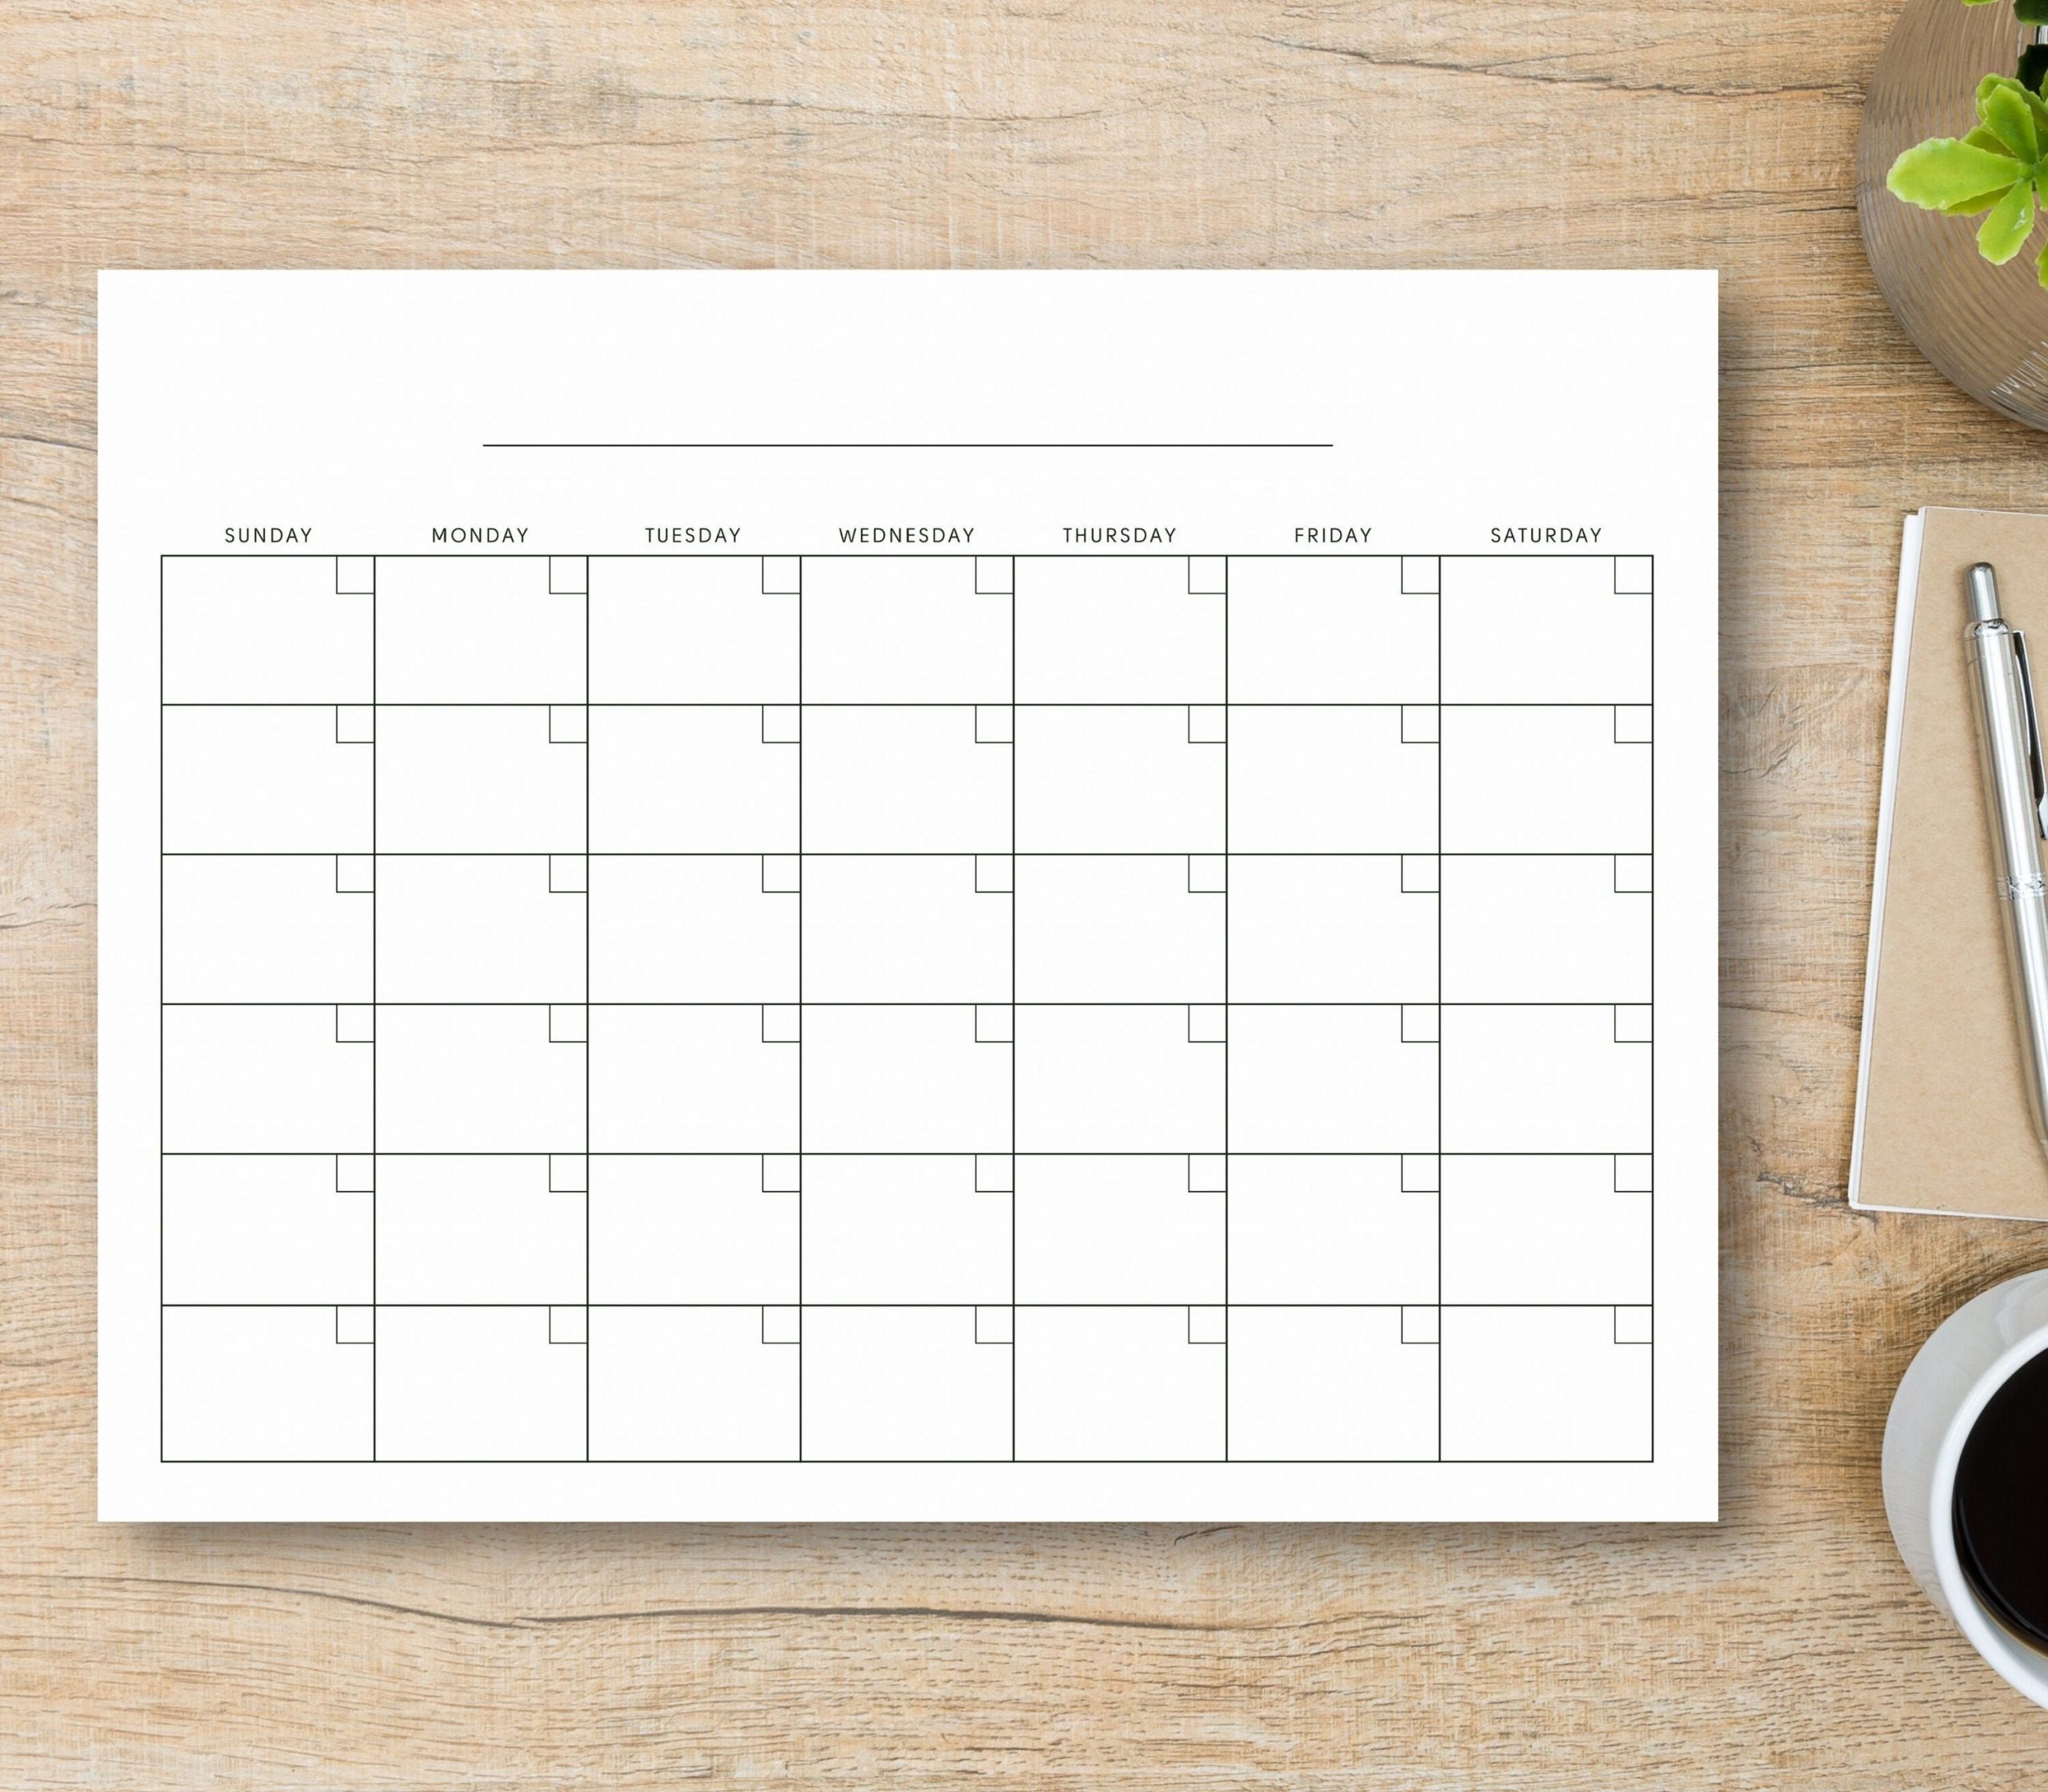 8 5 X 11 Inch Blank Calendar Page Template Instant